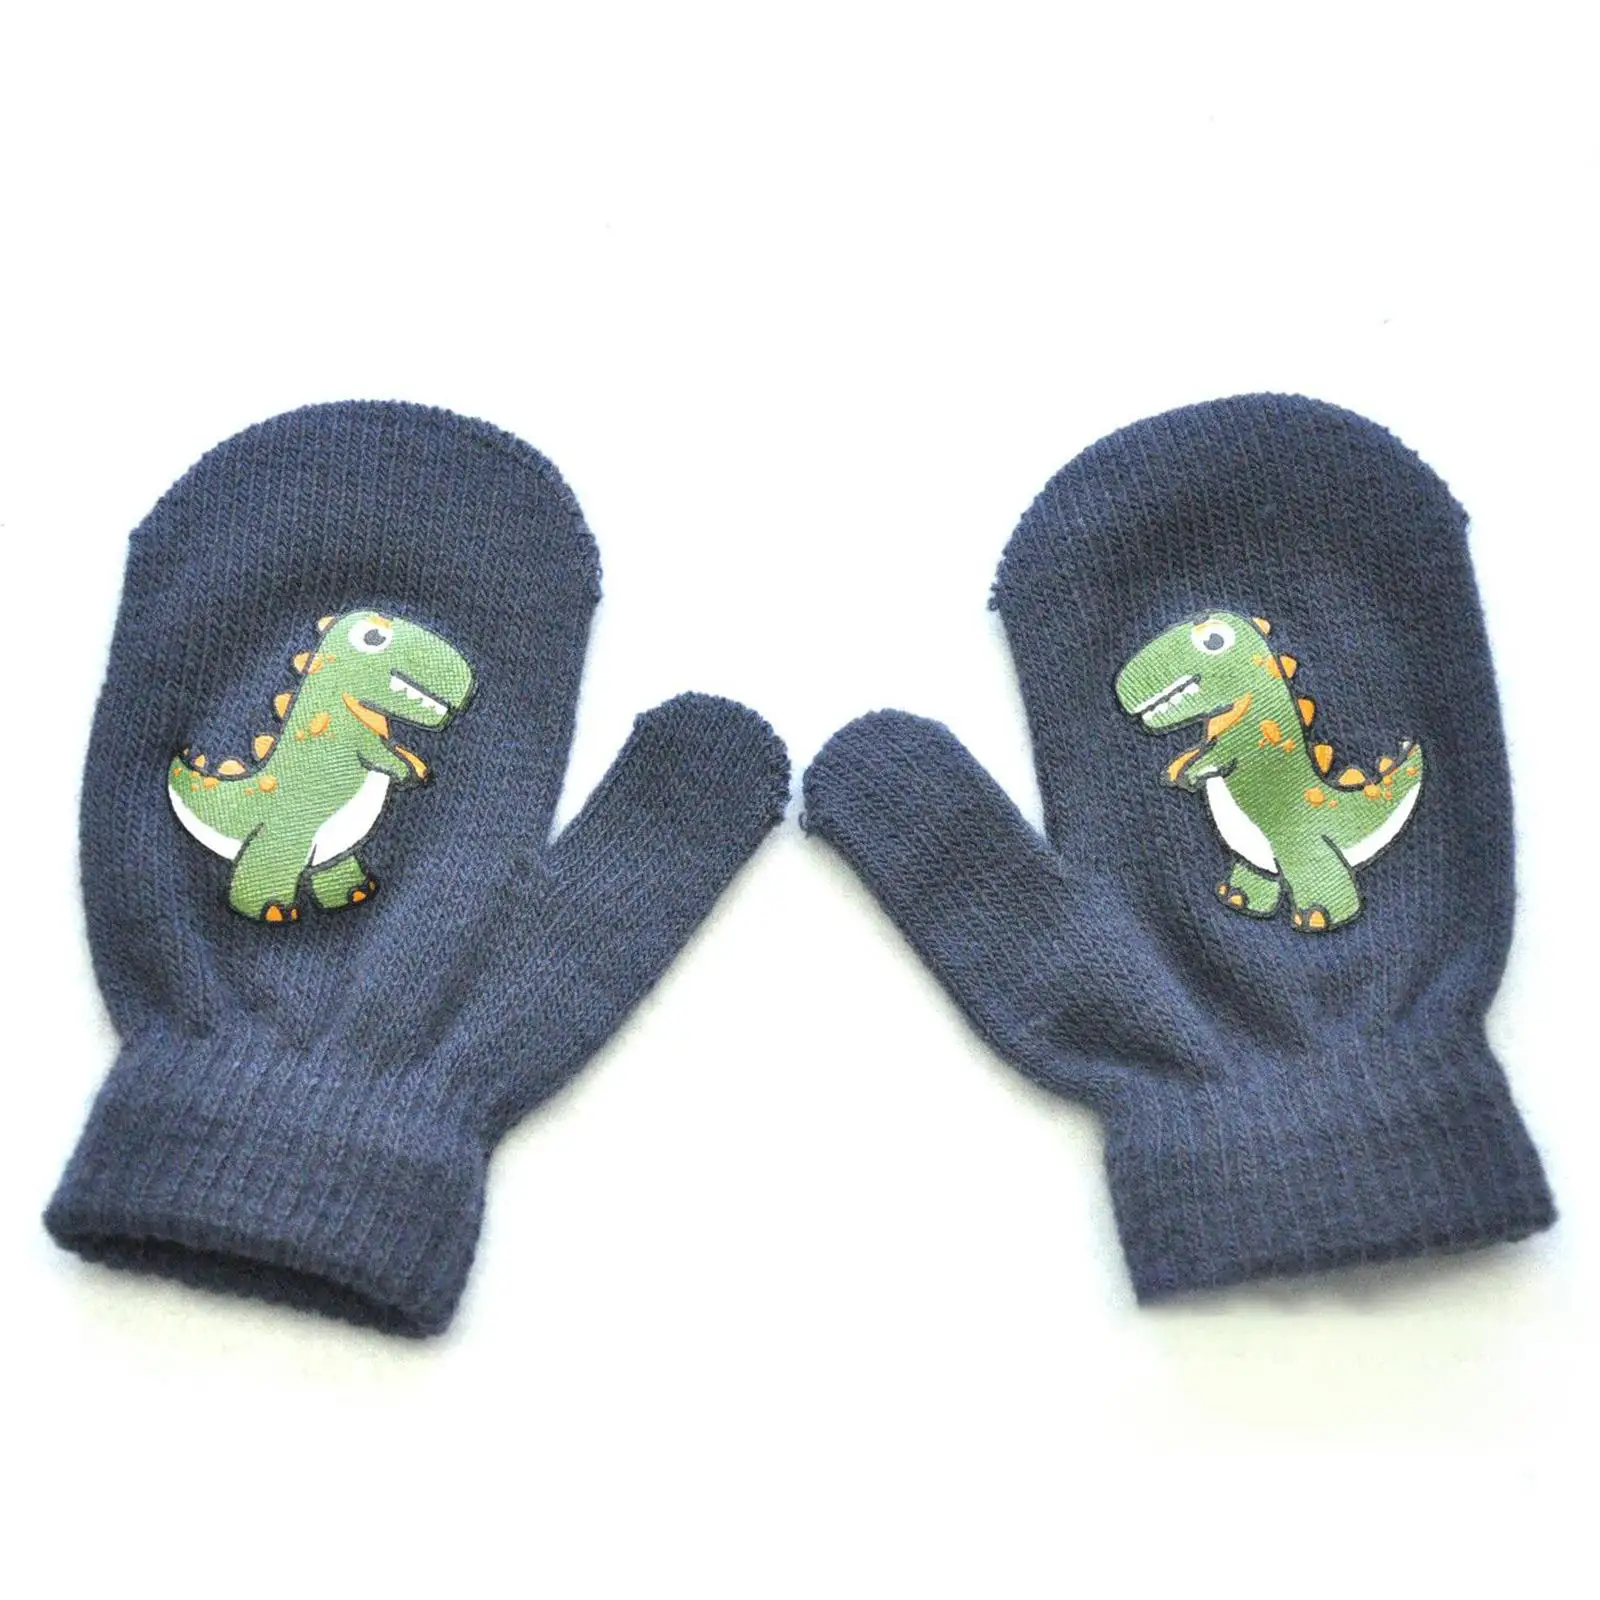 6x Children Winter Gloves Dinosaurs Pattern Full Fingers for Indoor and Outdoor Activities Warm Cute Appearance Assorted Color